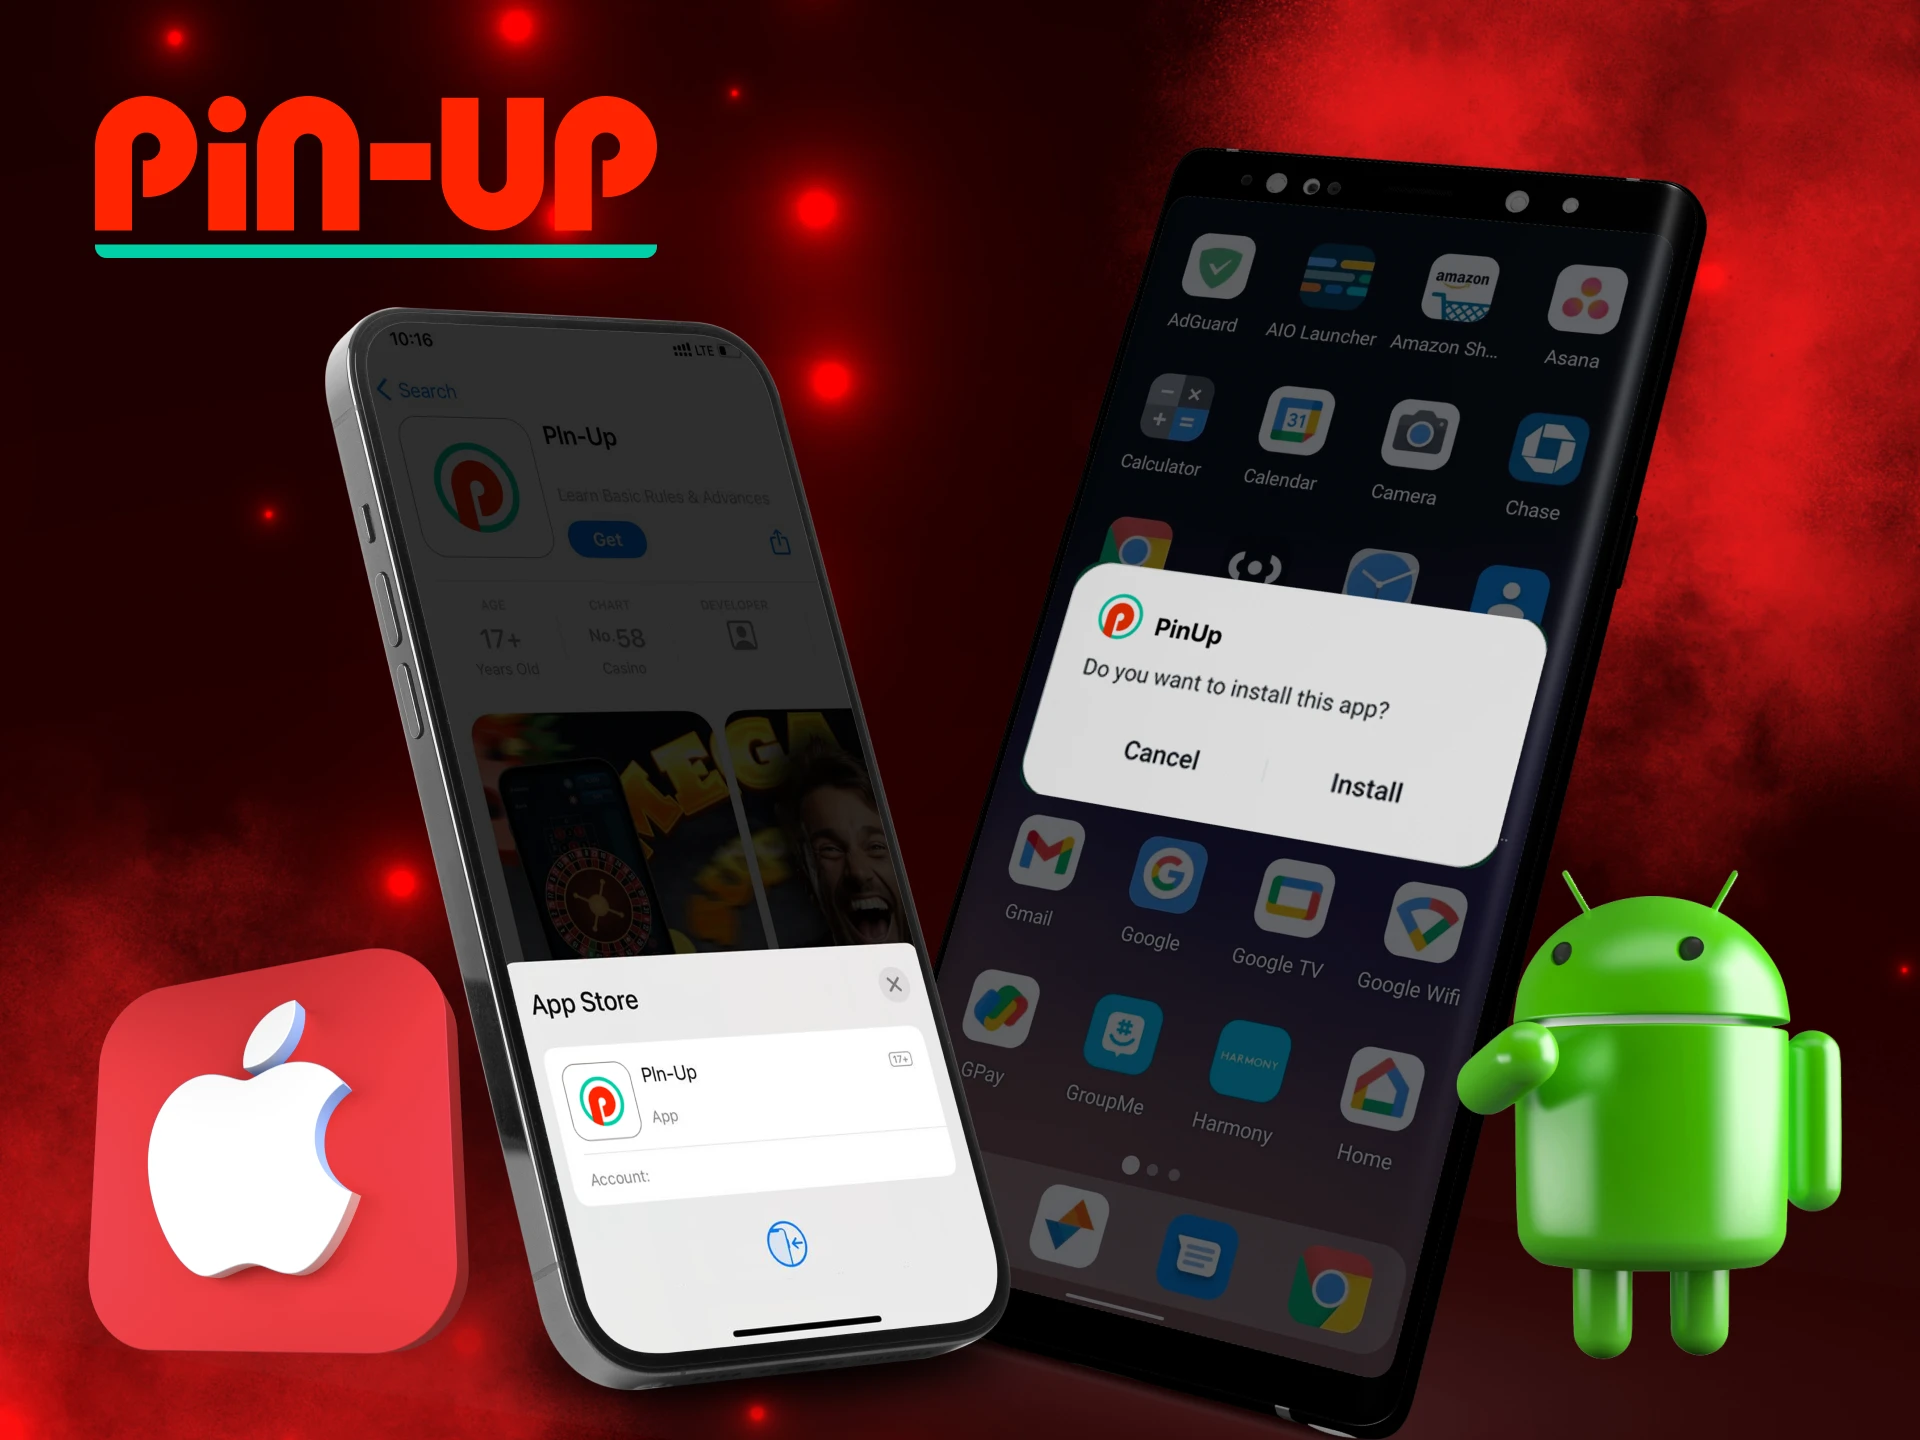 What are the following steps to install the Pin Up app.